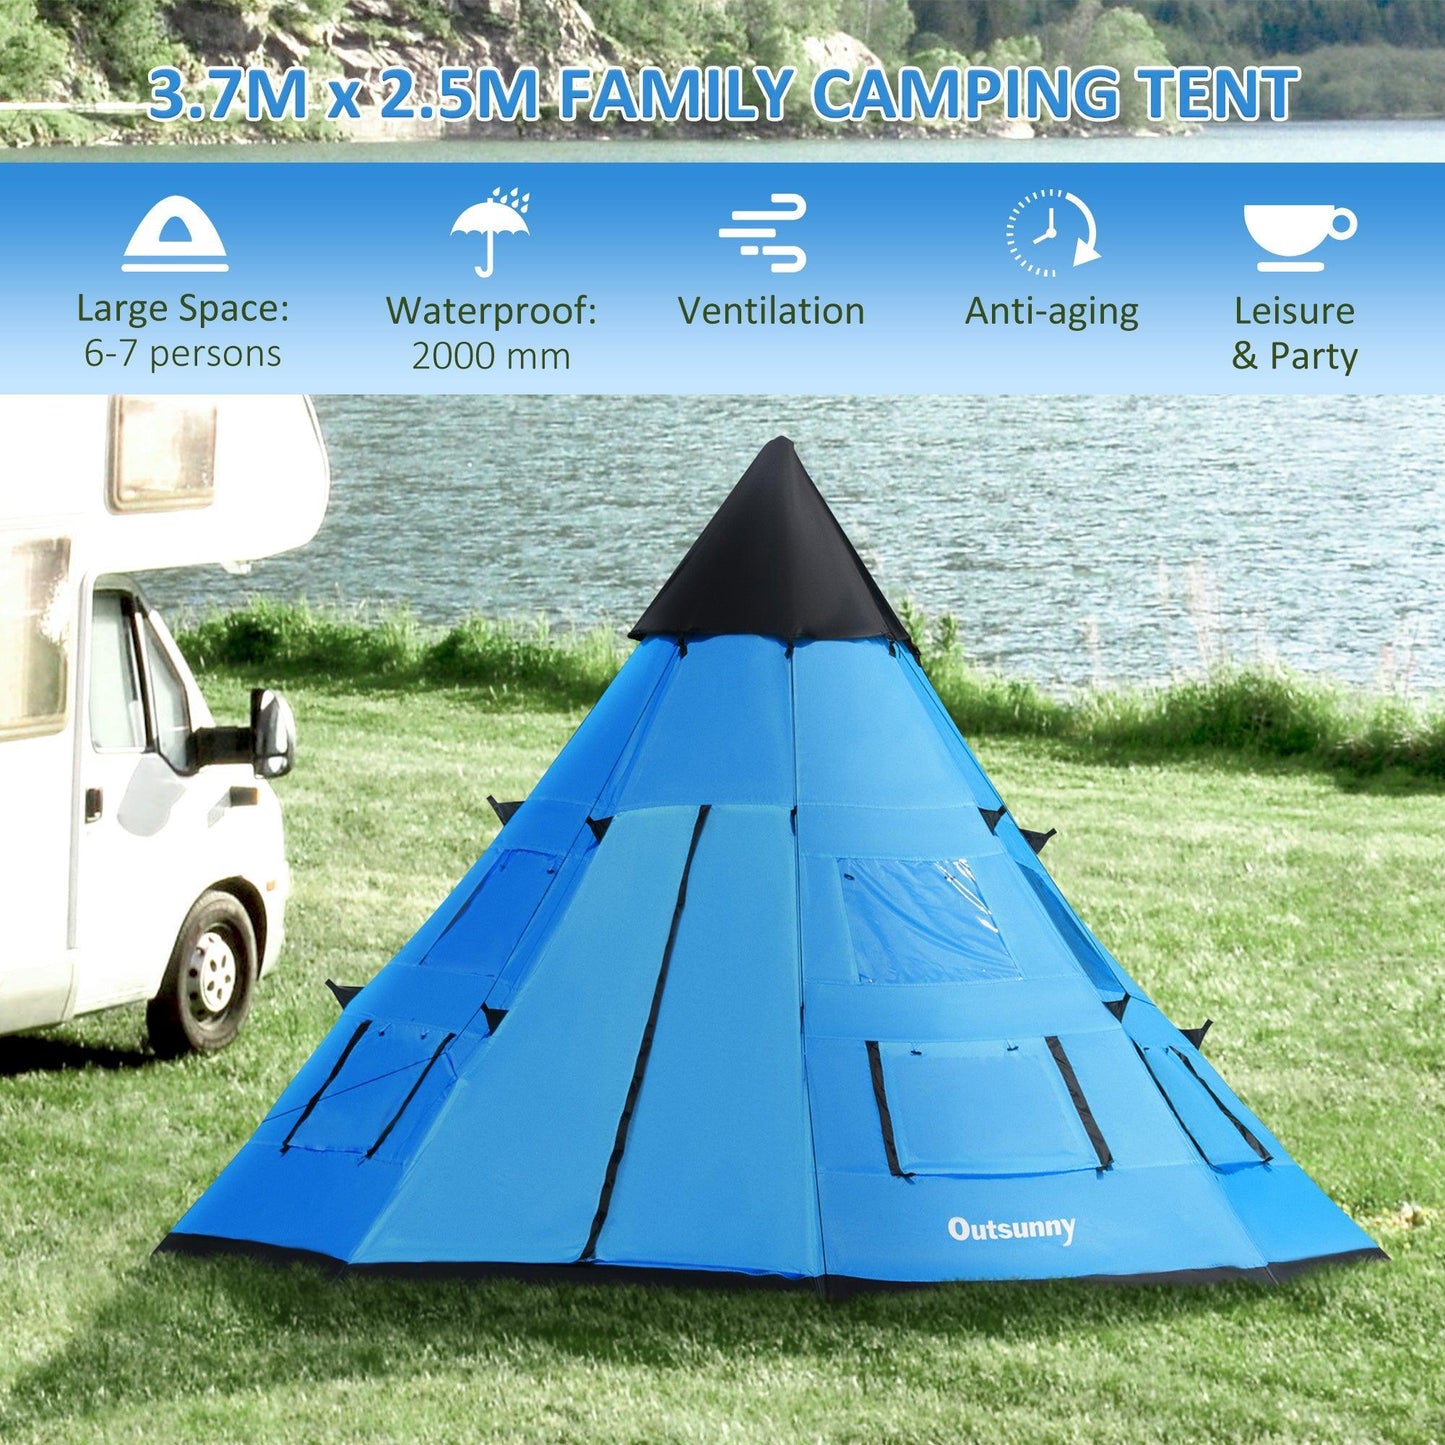 Outsunny 6-Person Teepee Tent, Easy Assembly, Blue - ALL4U RETAILER LTD